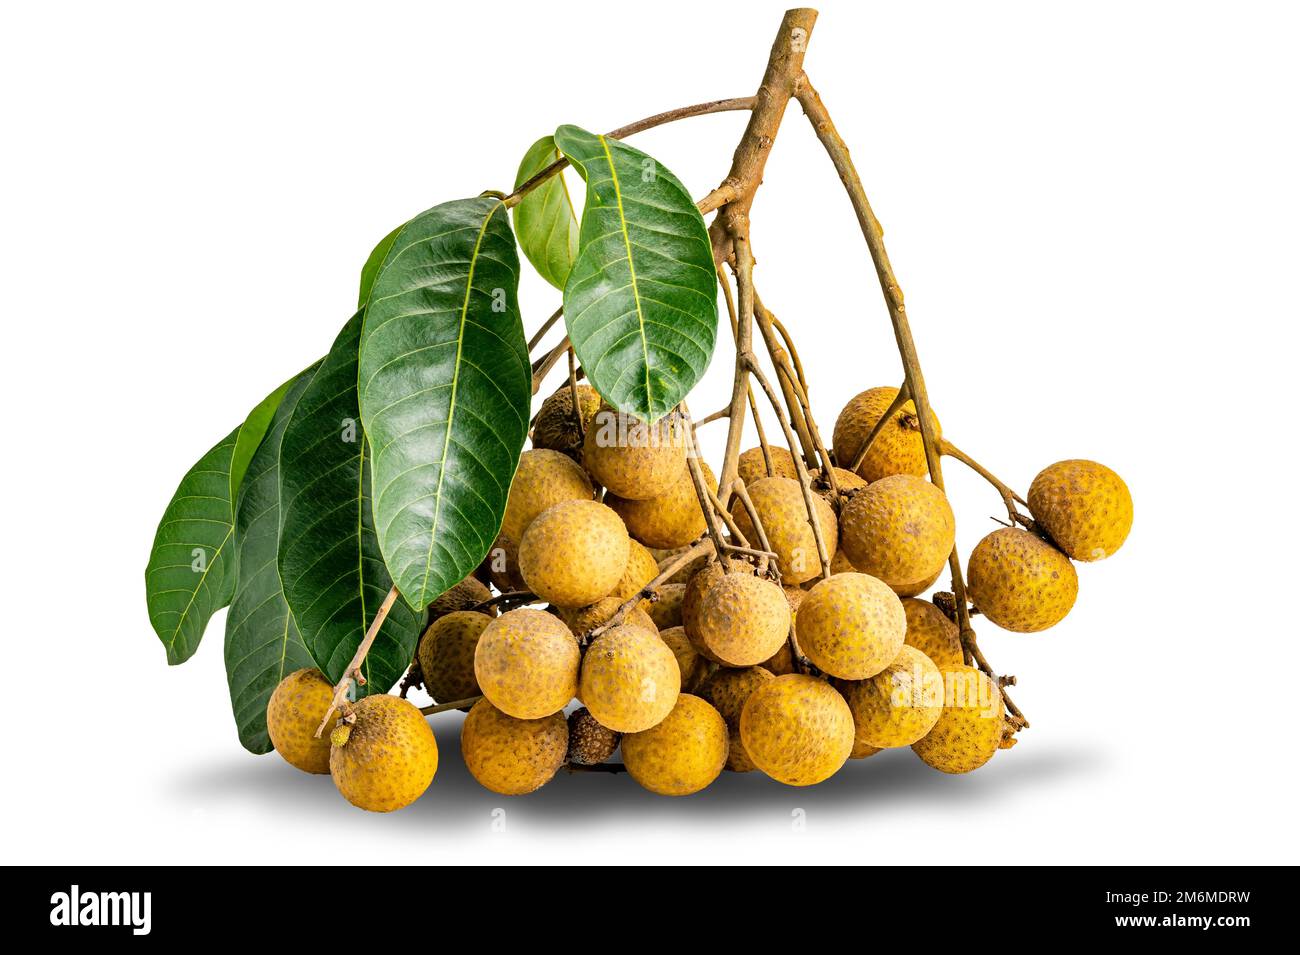 Bunch of fresh longan fruit with leaves and stalk isolated on white background. Stock Photo